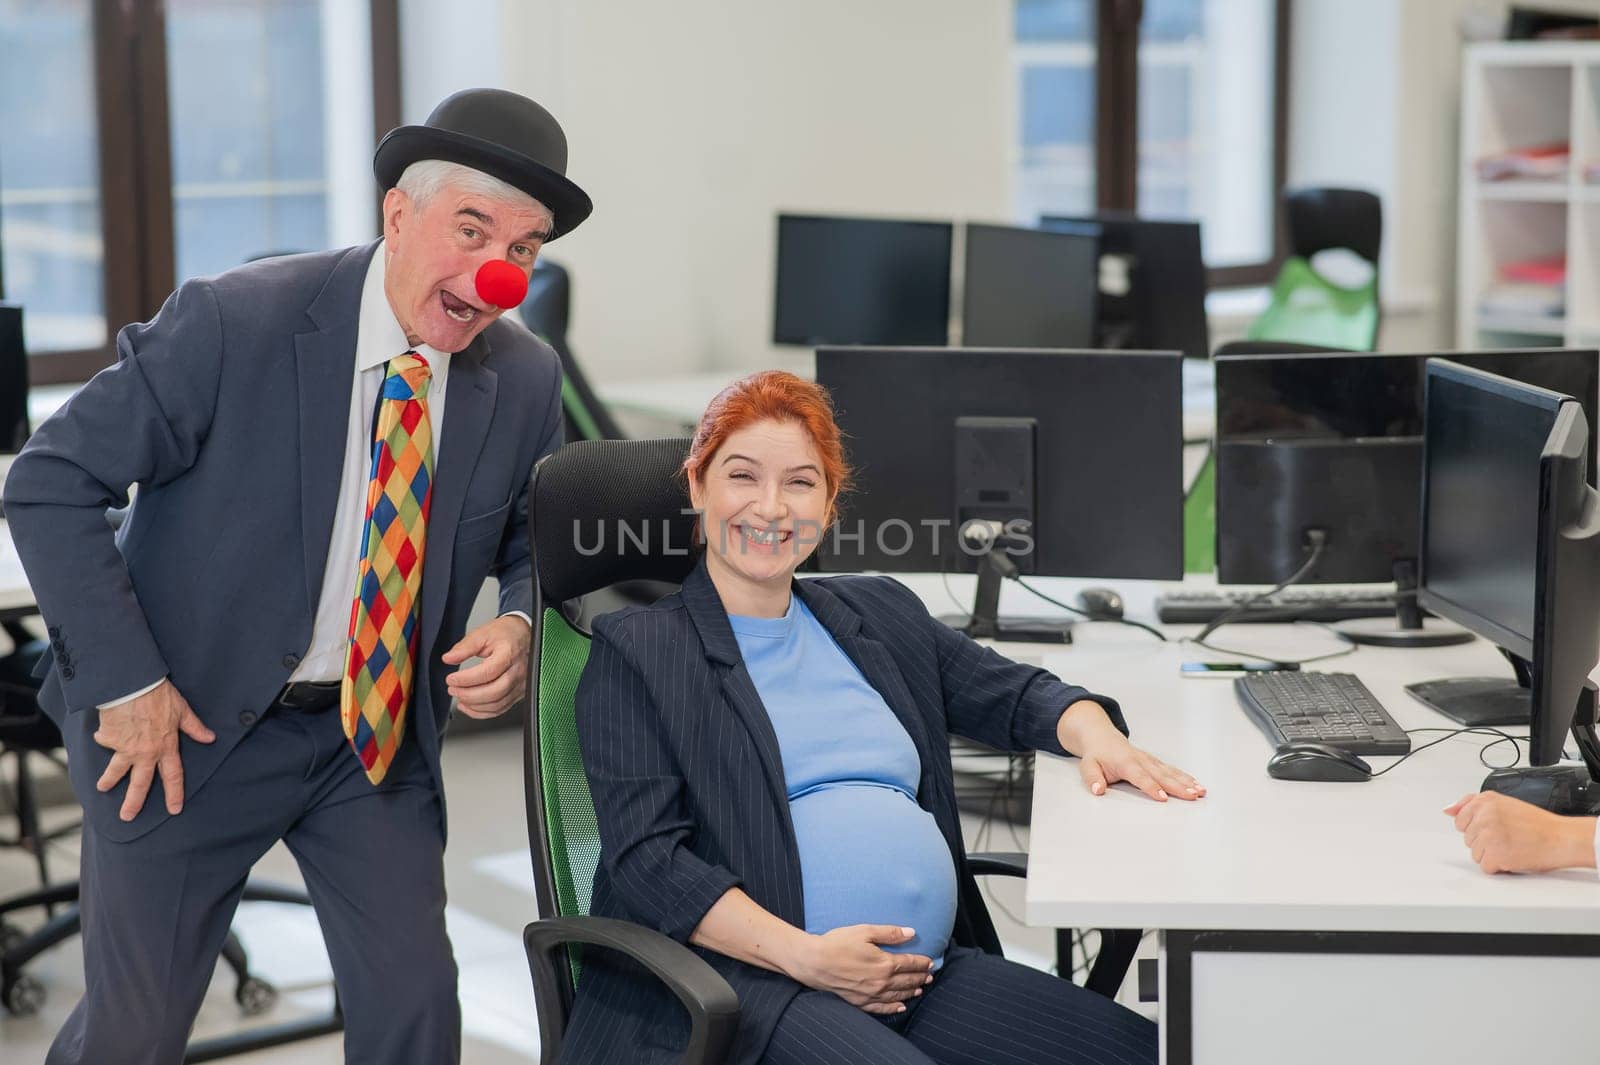 Elderly Caucasian man in clown costume amuses pregnant red-haired woman at work desk in office. by mrwed54